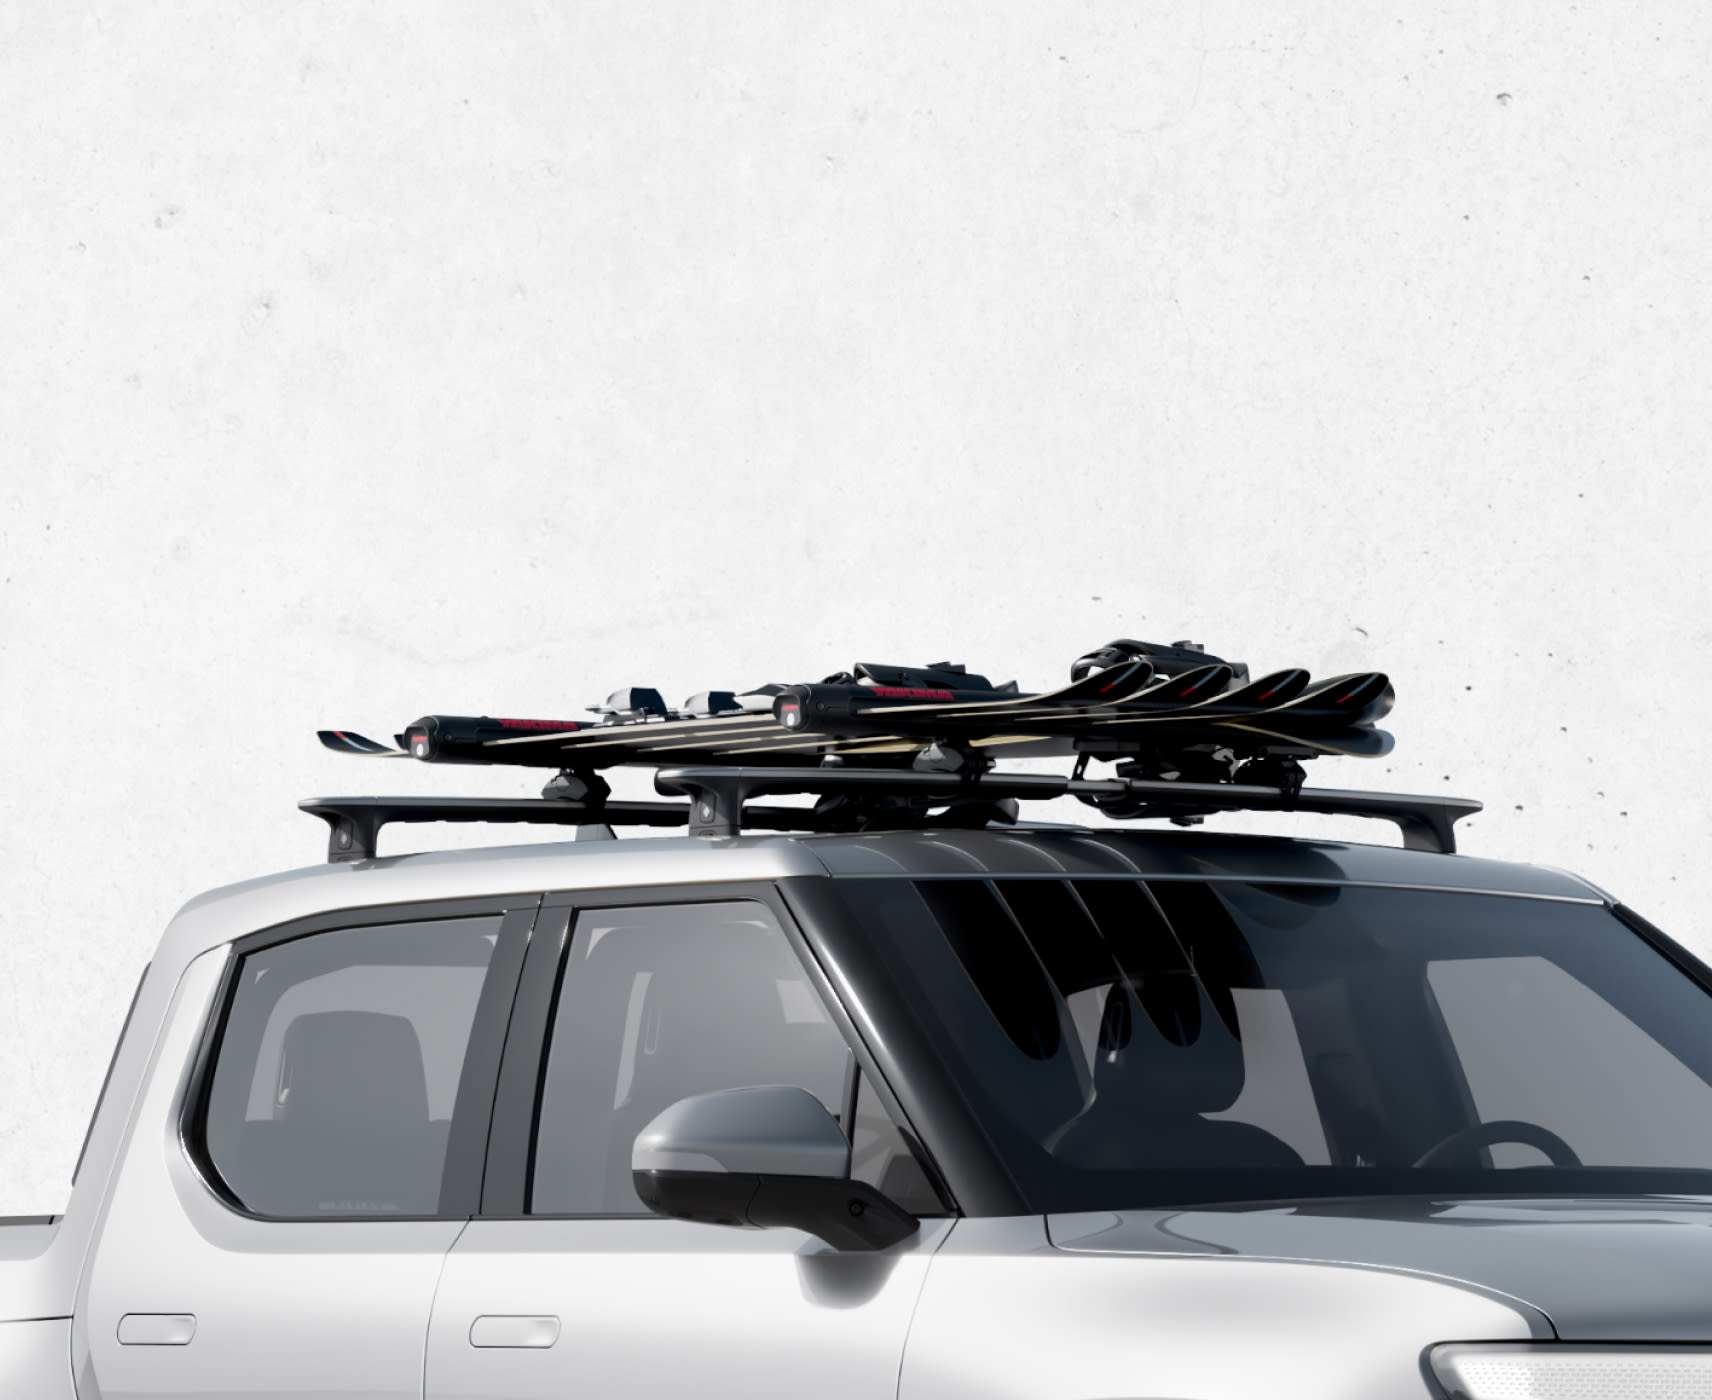 The Yakima ski rack doubles as an excellent fishing rod rack : r/Rivian